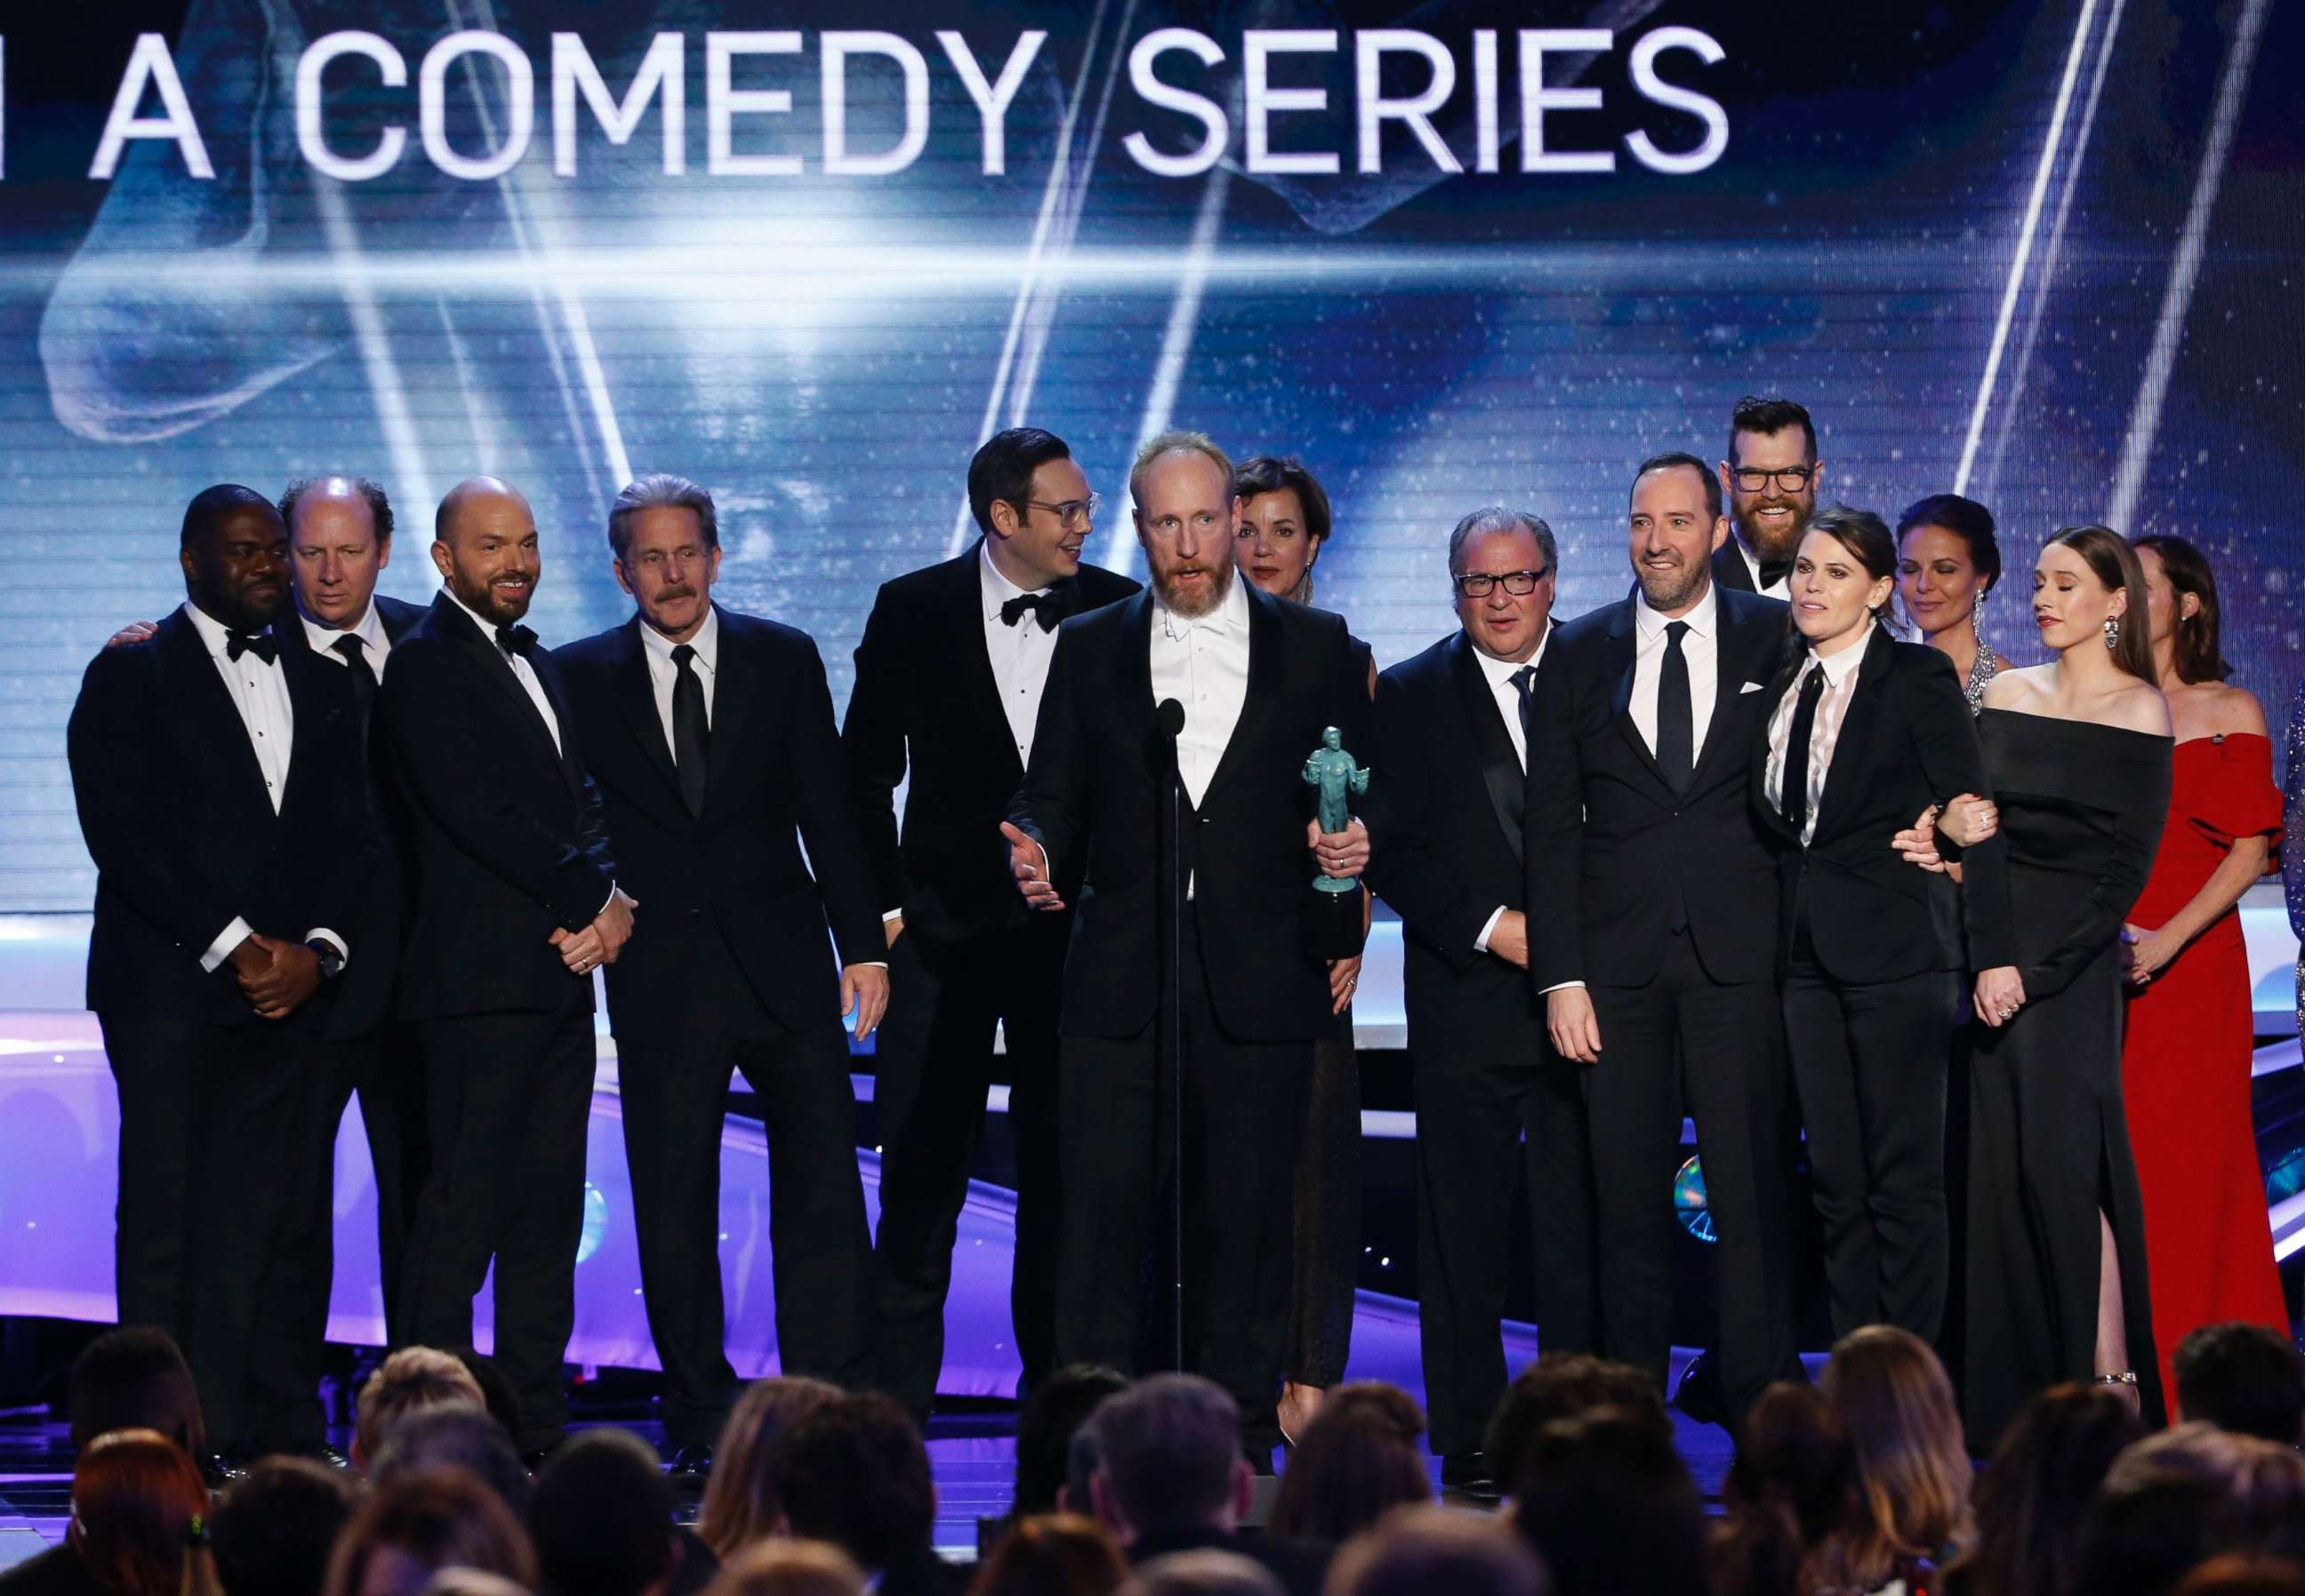 PHOTO: The cast of "Veep" celebrate after winning the award for Outstanding Performance by an Ensemble in a Comedy Series at the 24th Screen Actors Guild Awards in Los Angeles, Jan. 21, 2018.